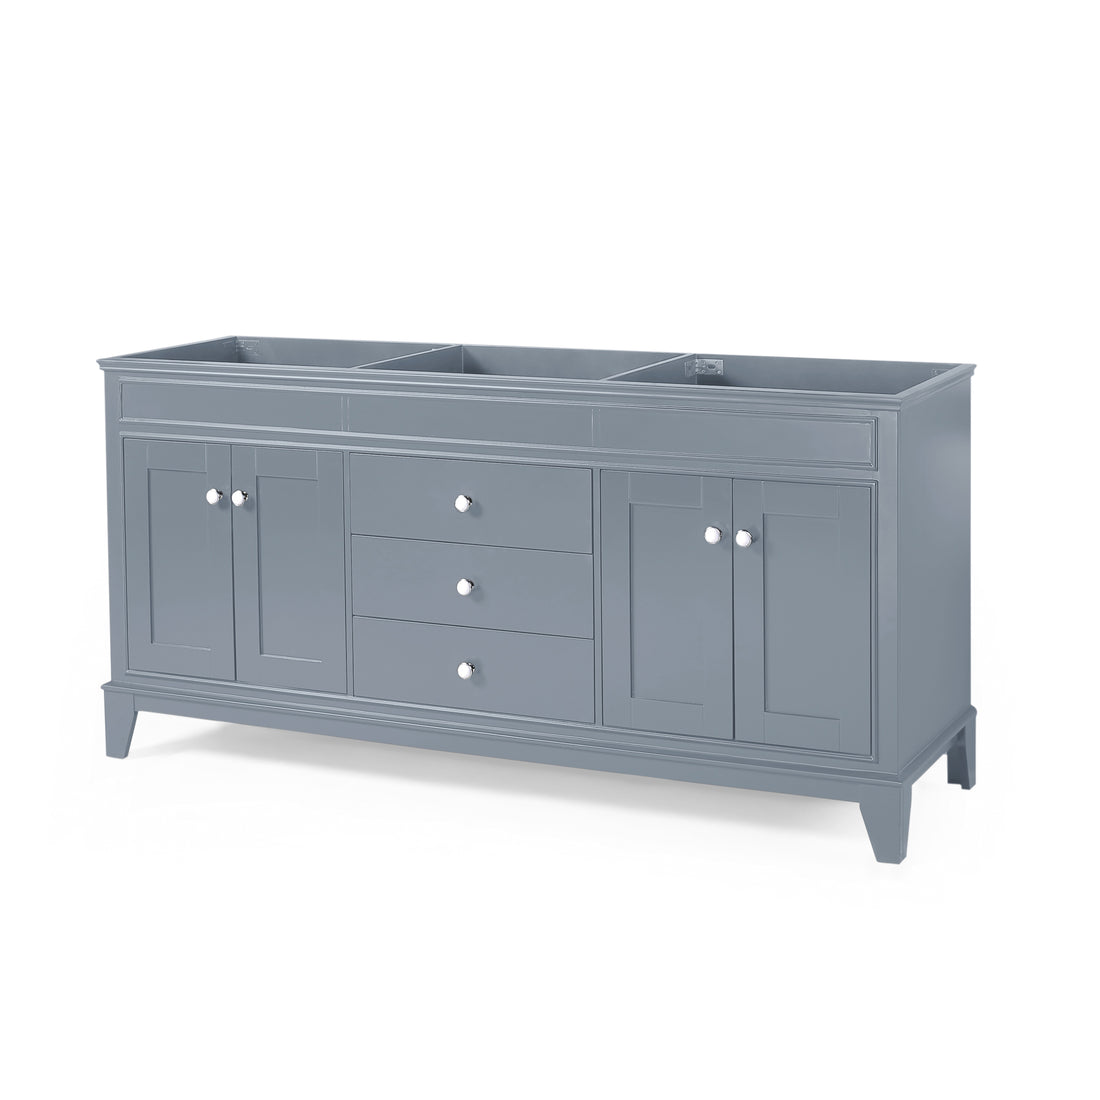 72'' Cabinet - Gray Plywood